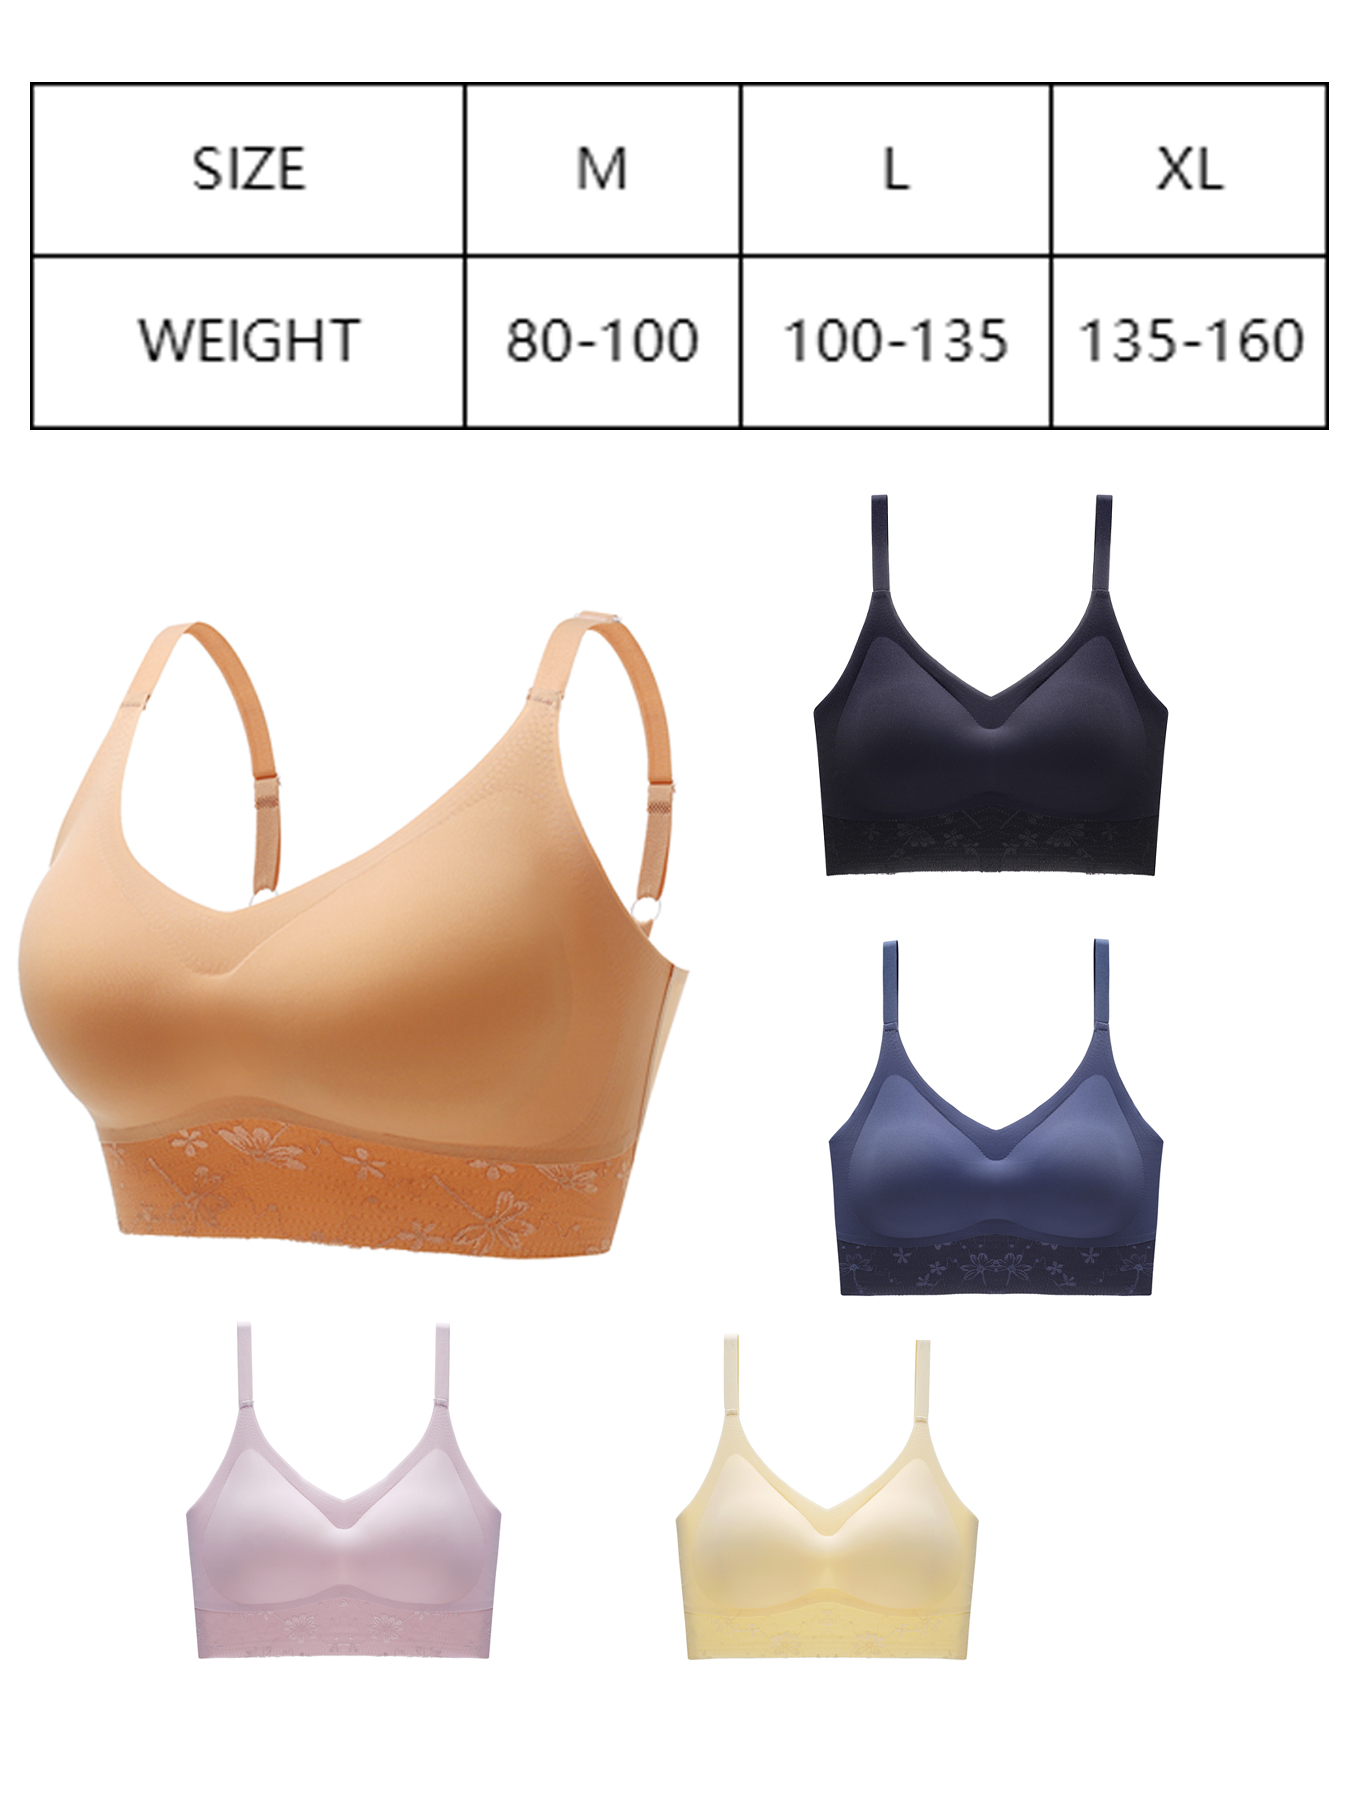 Bras Seamless Sexy Lace For Women Wireless Push Up Bra Comfort Soft White  Black Undearwear Bralette Ladies Lingerie From Depensibley, $19.15